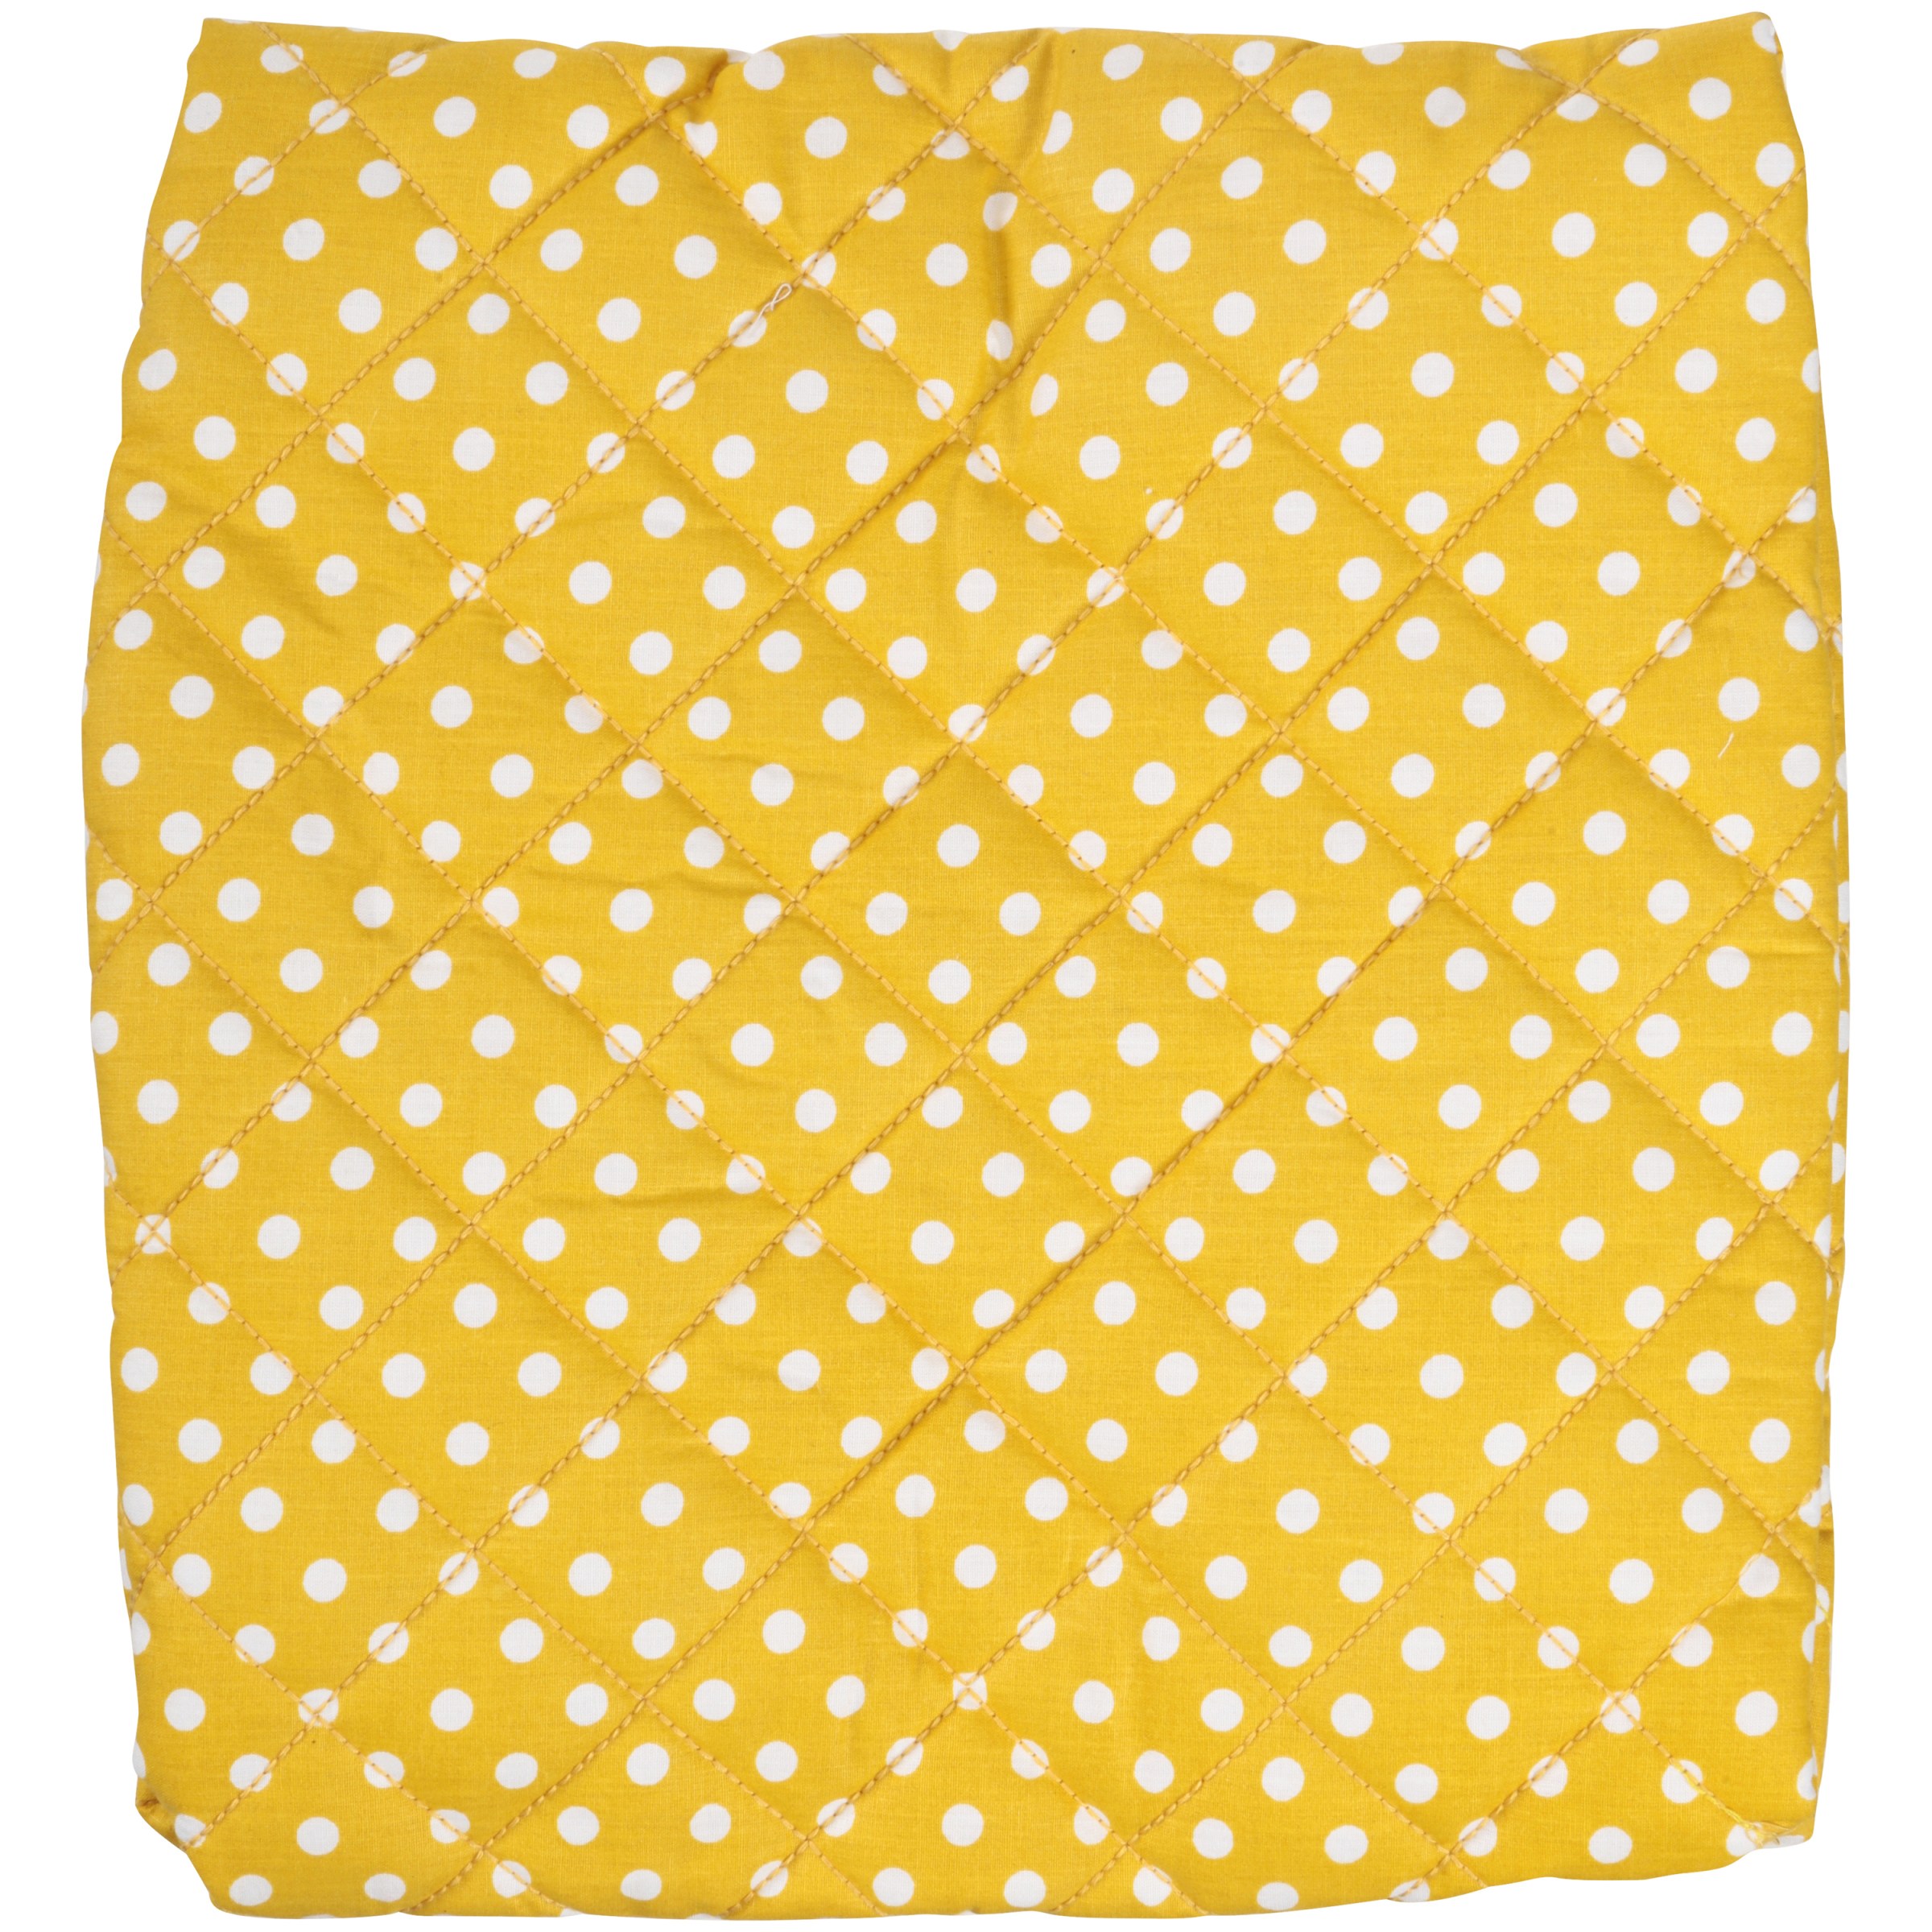 Bacati Yellow Dotted & Pin Stripes Changing Pad Cover - image 1 of 3